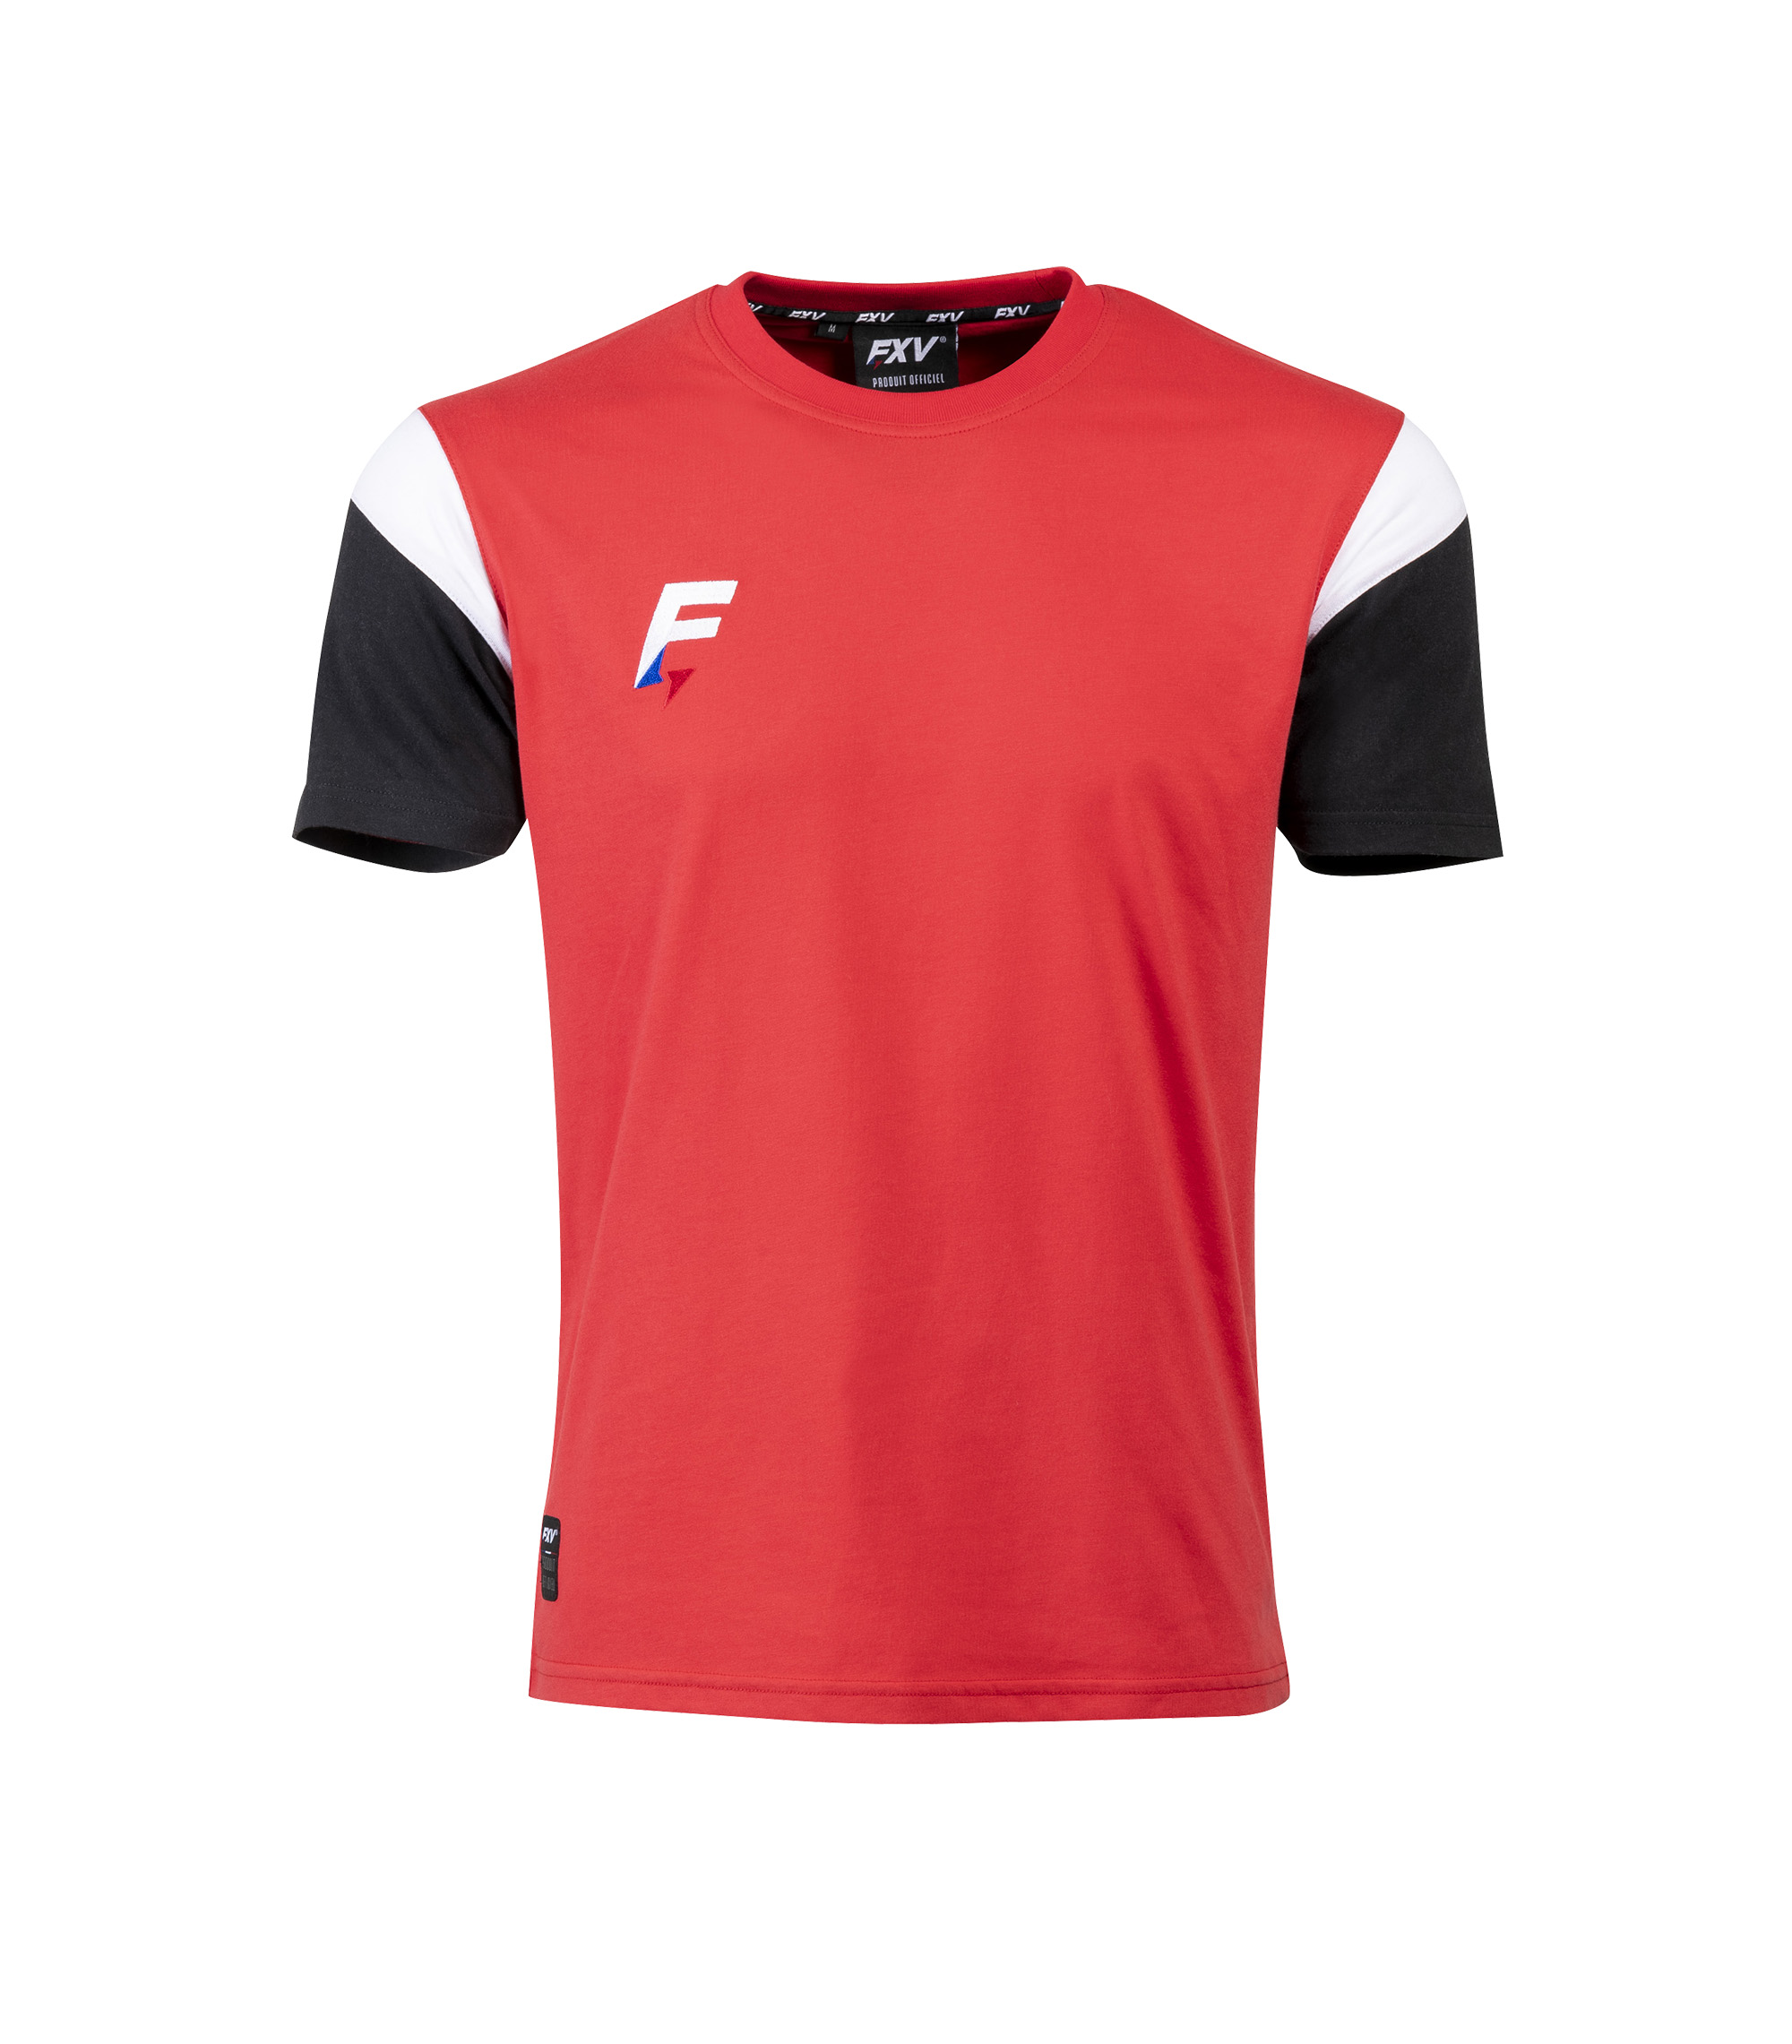 FORCE_XV_F30CONQUETERBN__tee_shirt_de_rugy_conquete_rouge_blanc_gris_sgequipement_sg_equiement